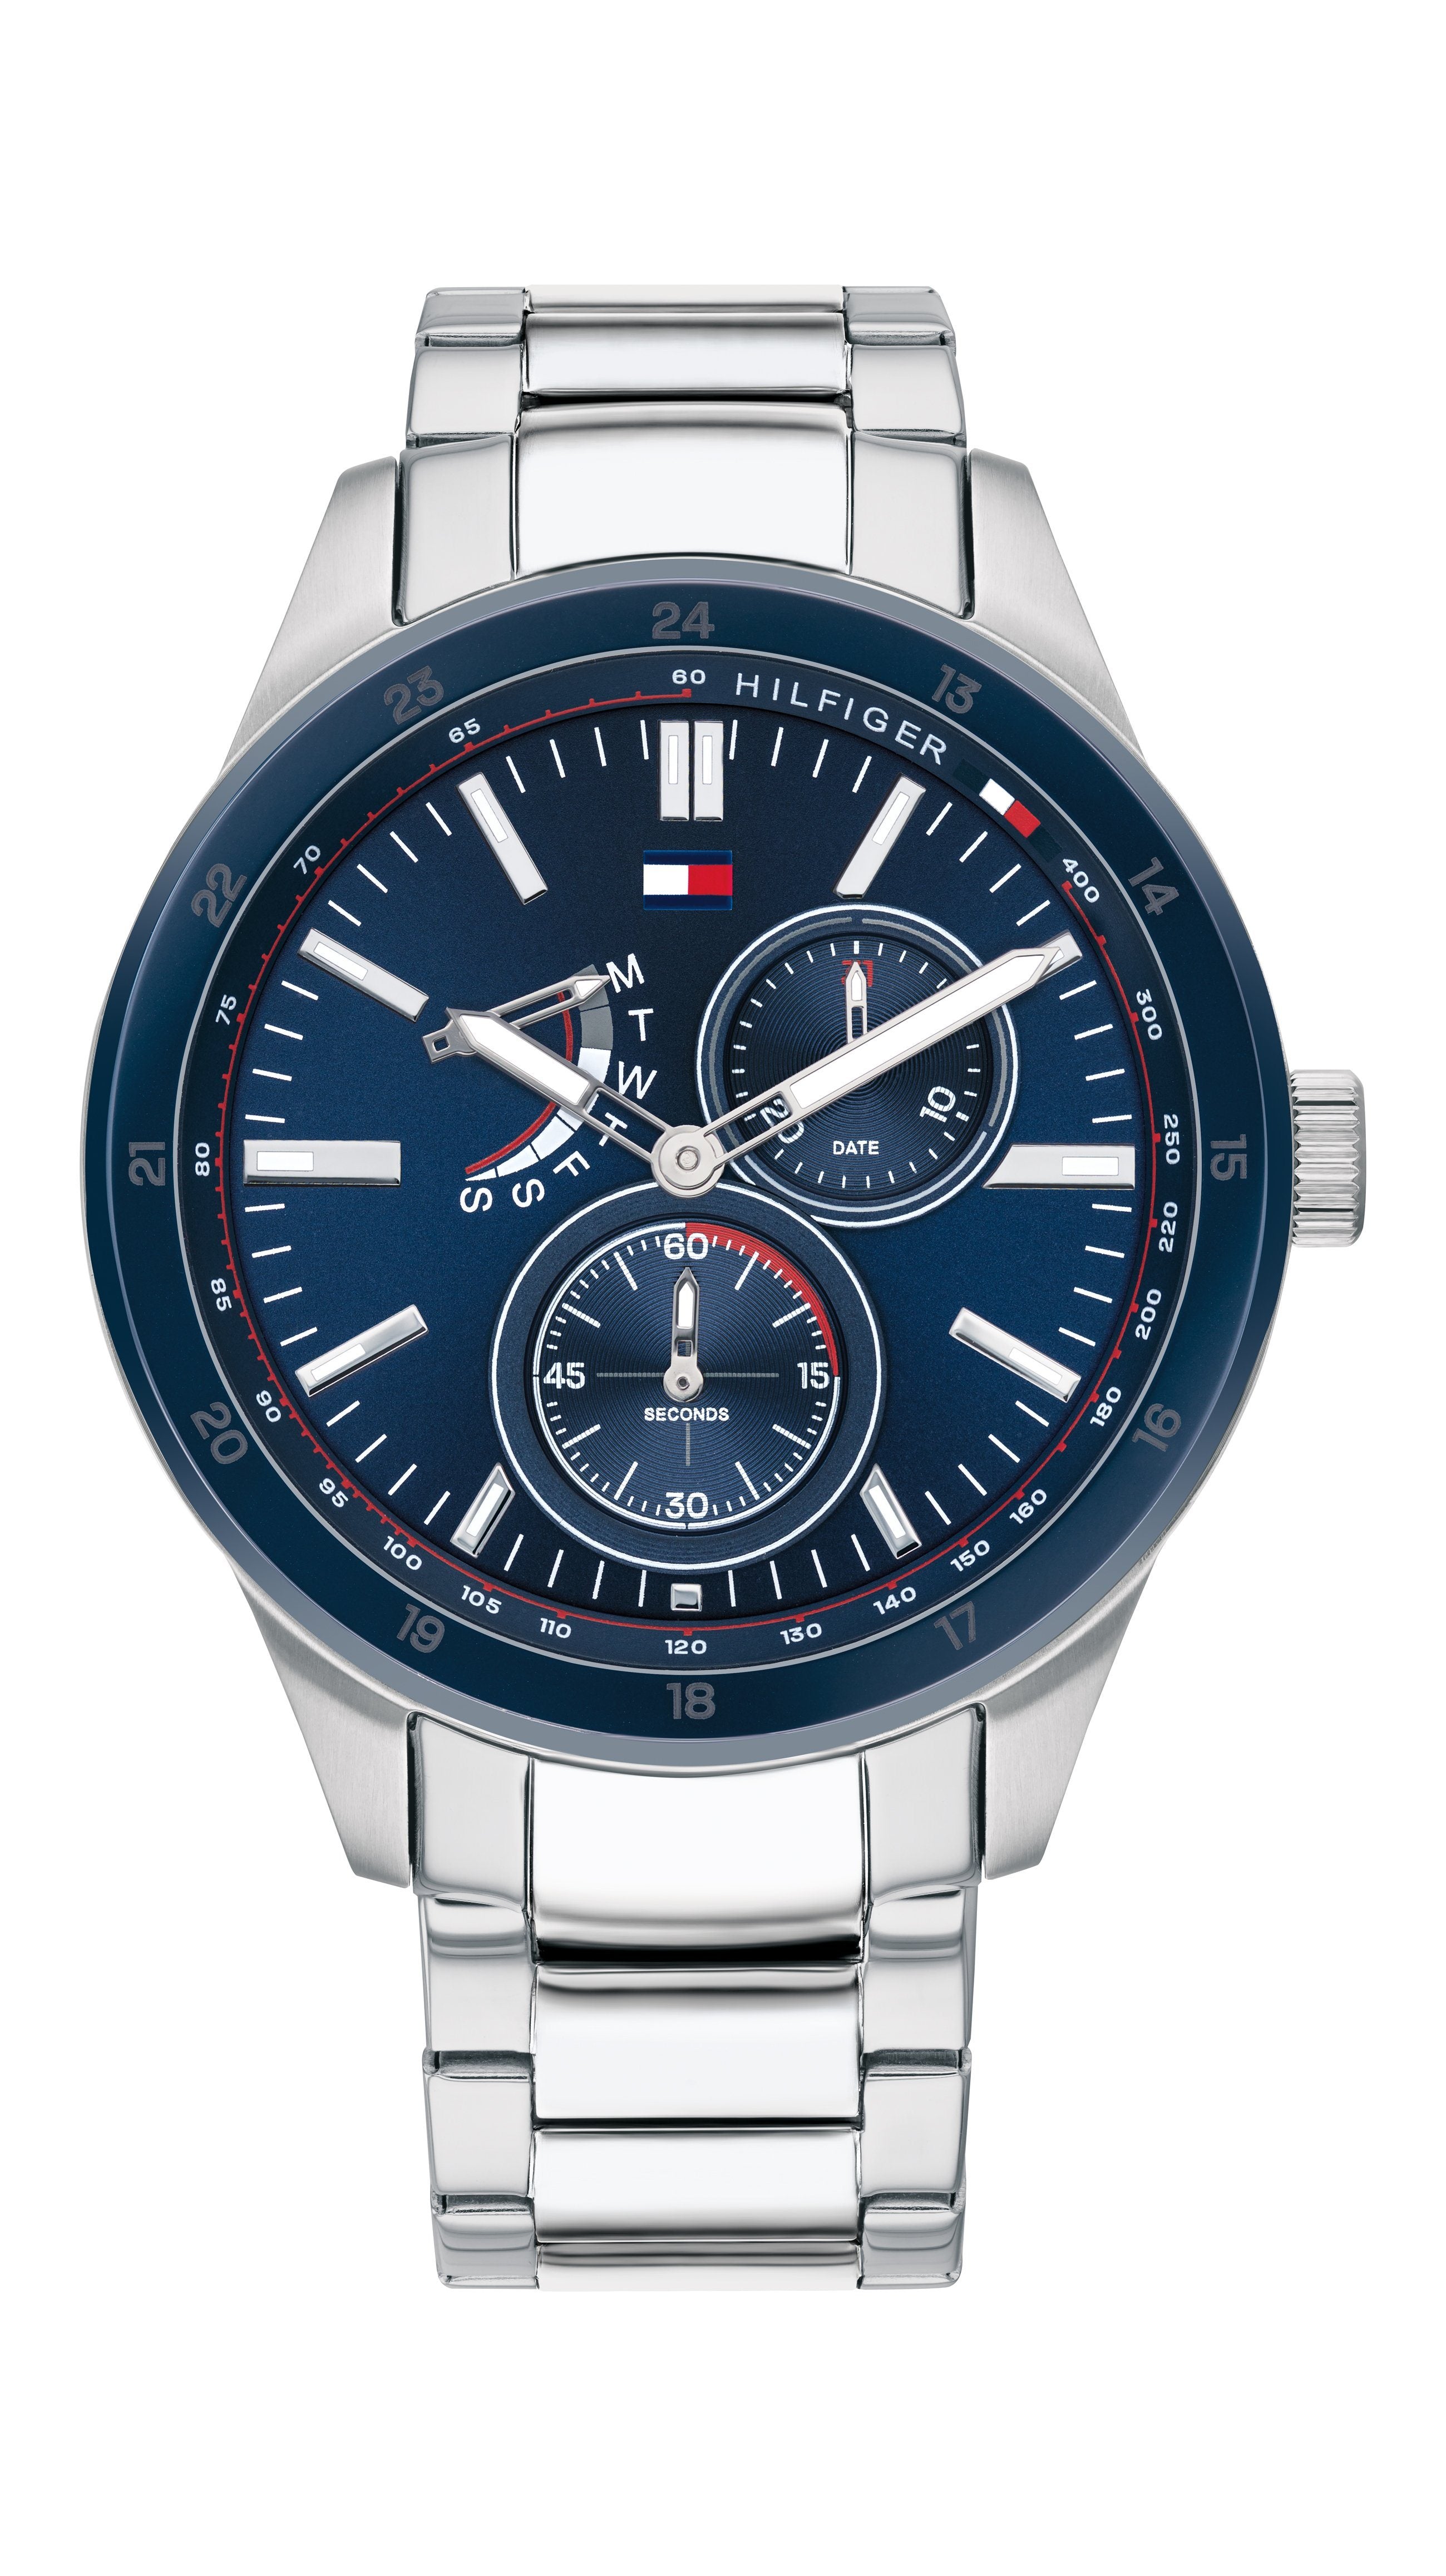 is tommy hilfiger a good brand for watches